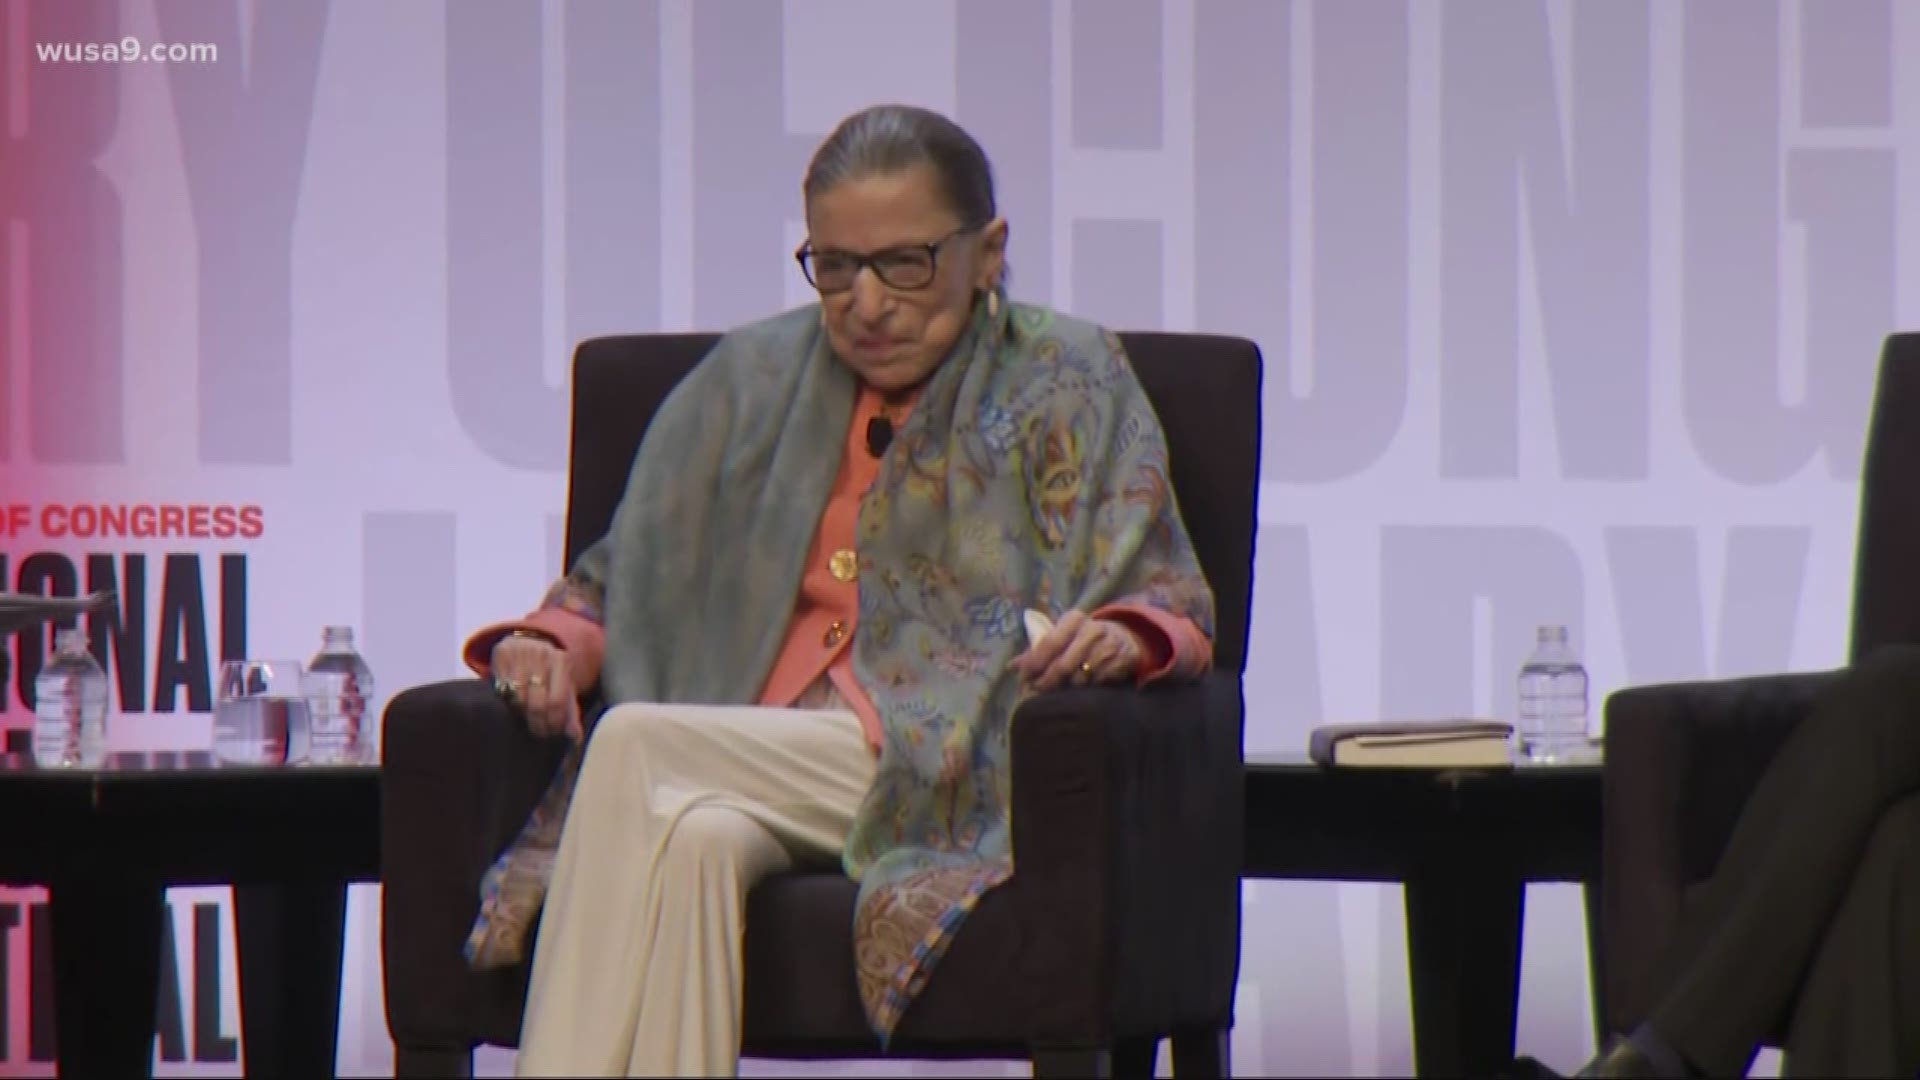 Supreme Court Justice Ruth Bade Ginsburg was at a D.C. book festival and answered some questions. She announced last week that she underwent radiation treatment for her cancerous tumor on her pancreas. That's not slowing the 86-year-old down.